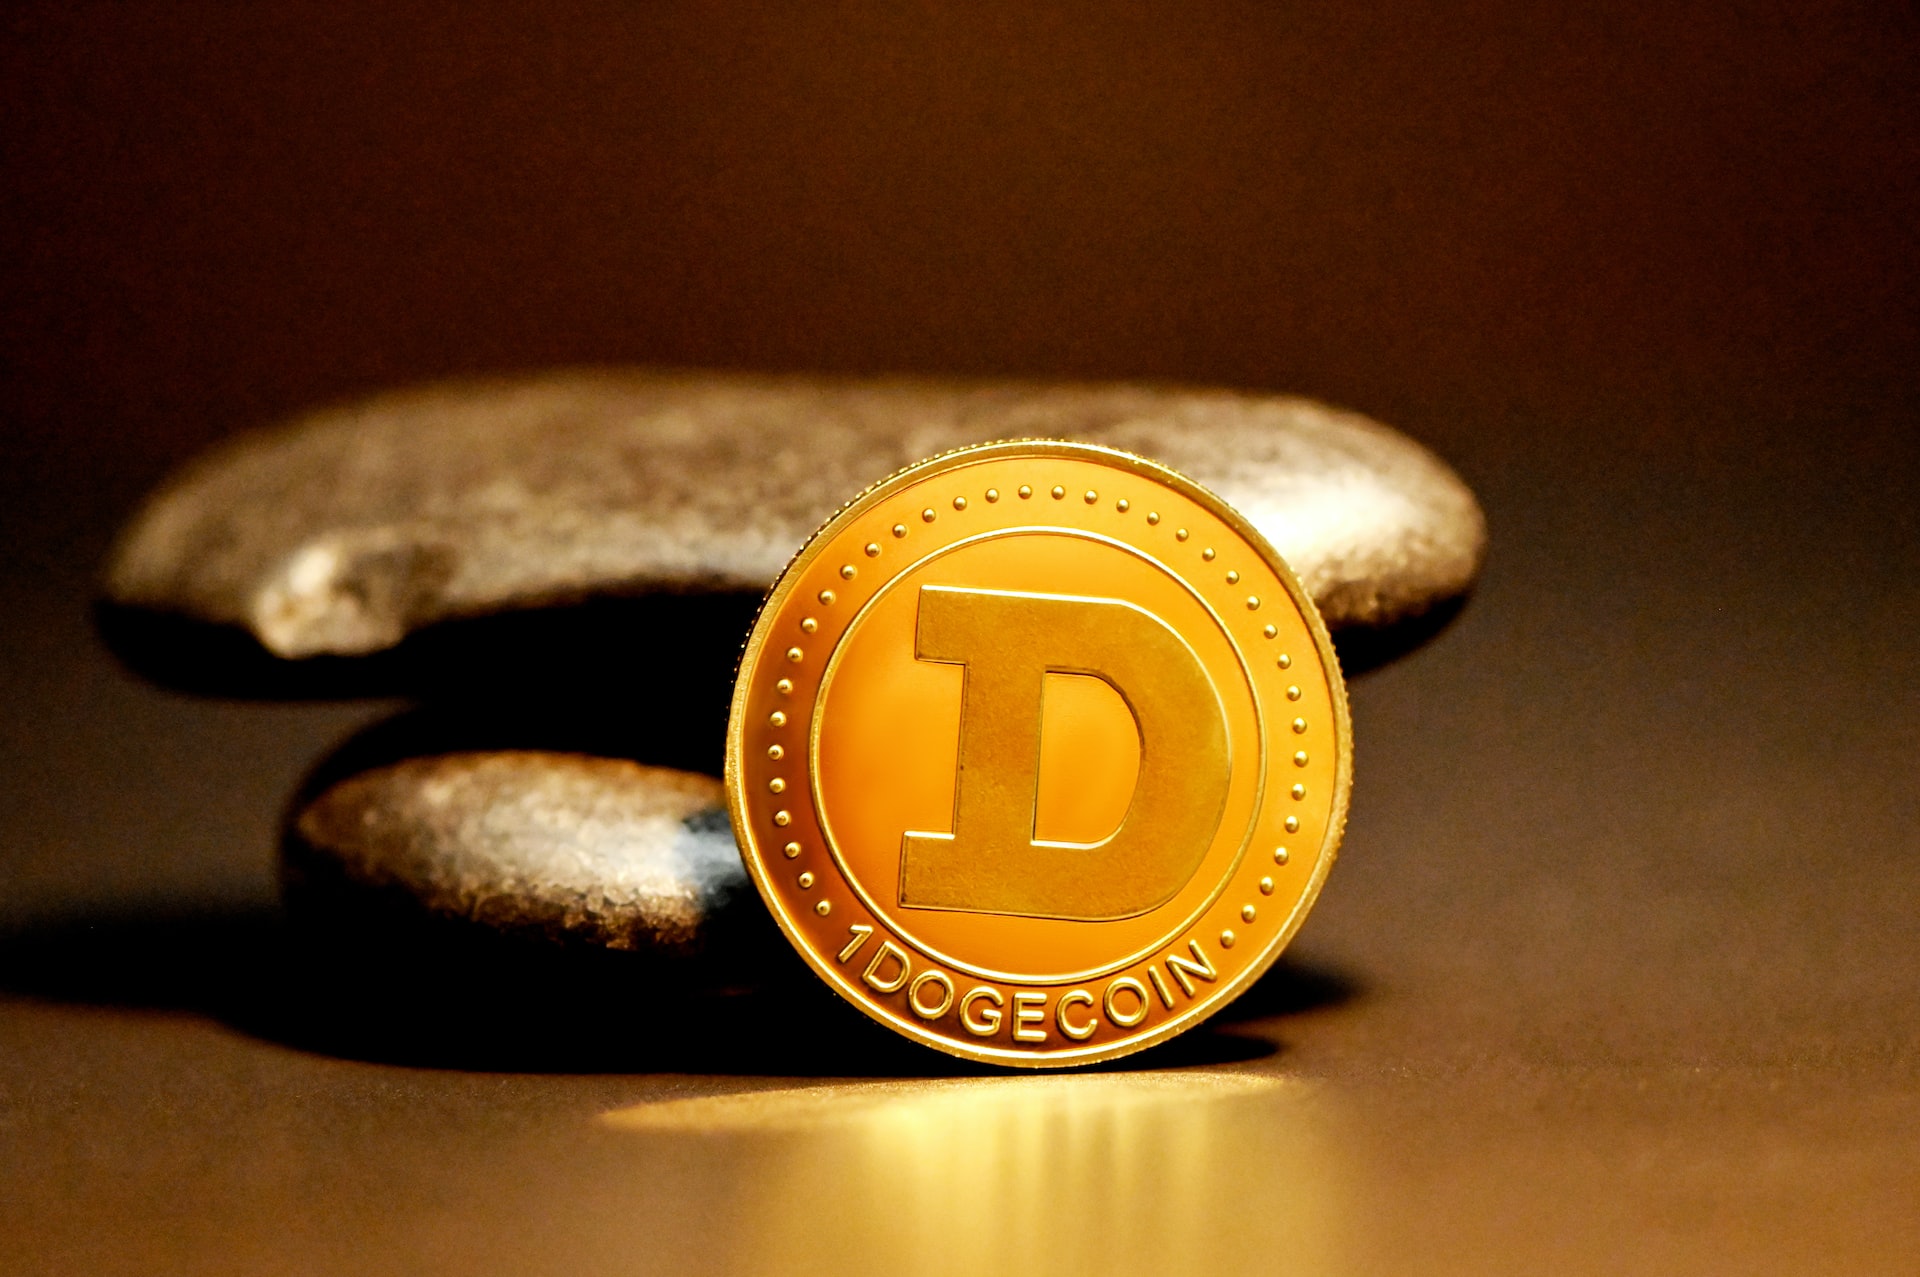 Dogecoin Price Continues To Consolidate But A Move Above This Level Could Fuel A Rally